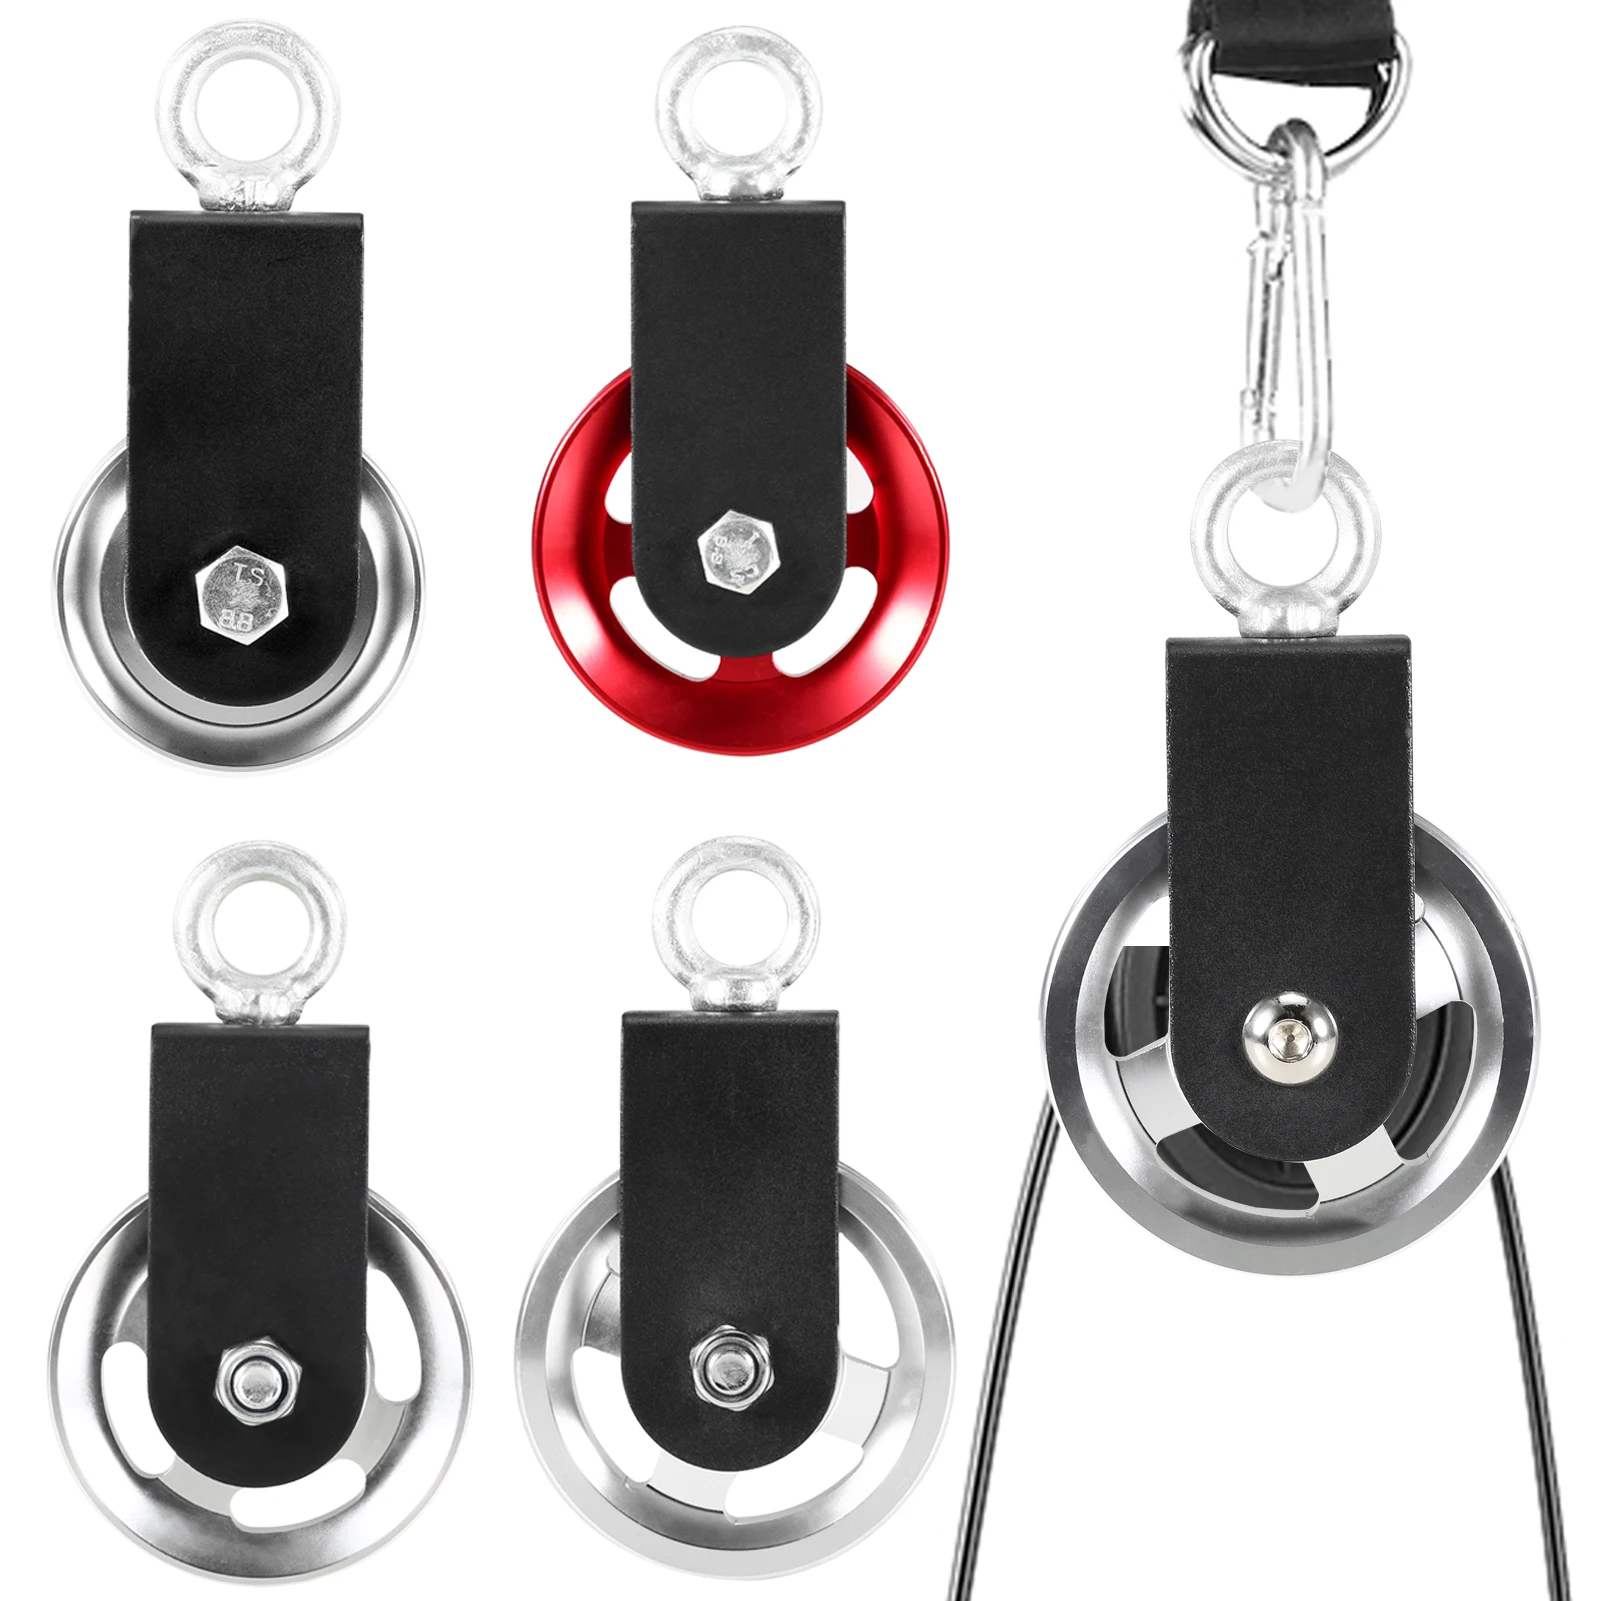 

360 Degree Silent Cable Pulley Detachable Rotation Traction Wheel Pulley System DIY Attachment for Home Gym Lifting